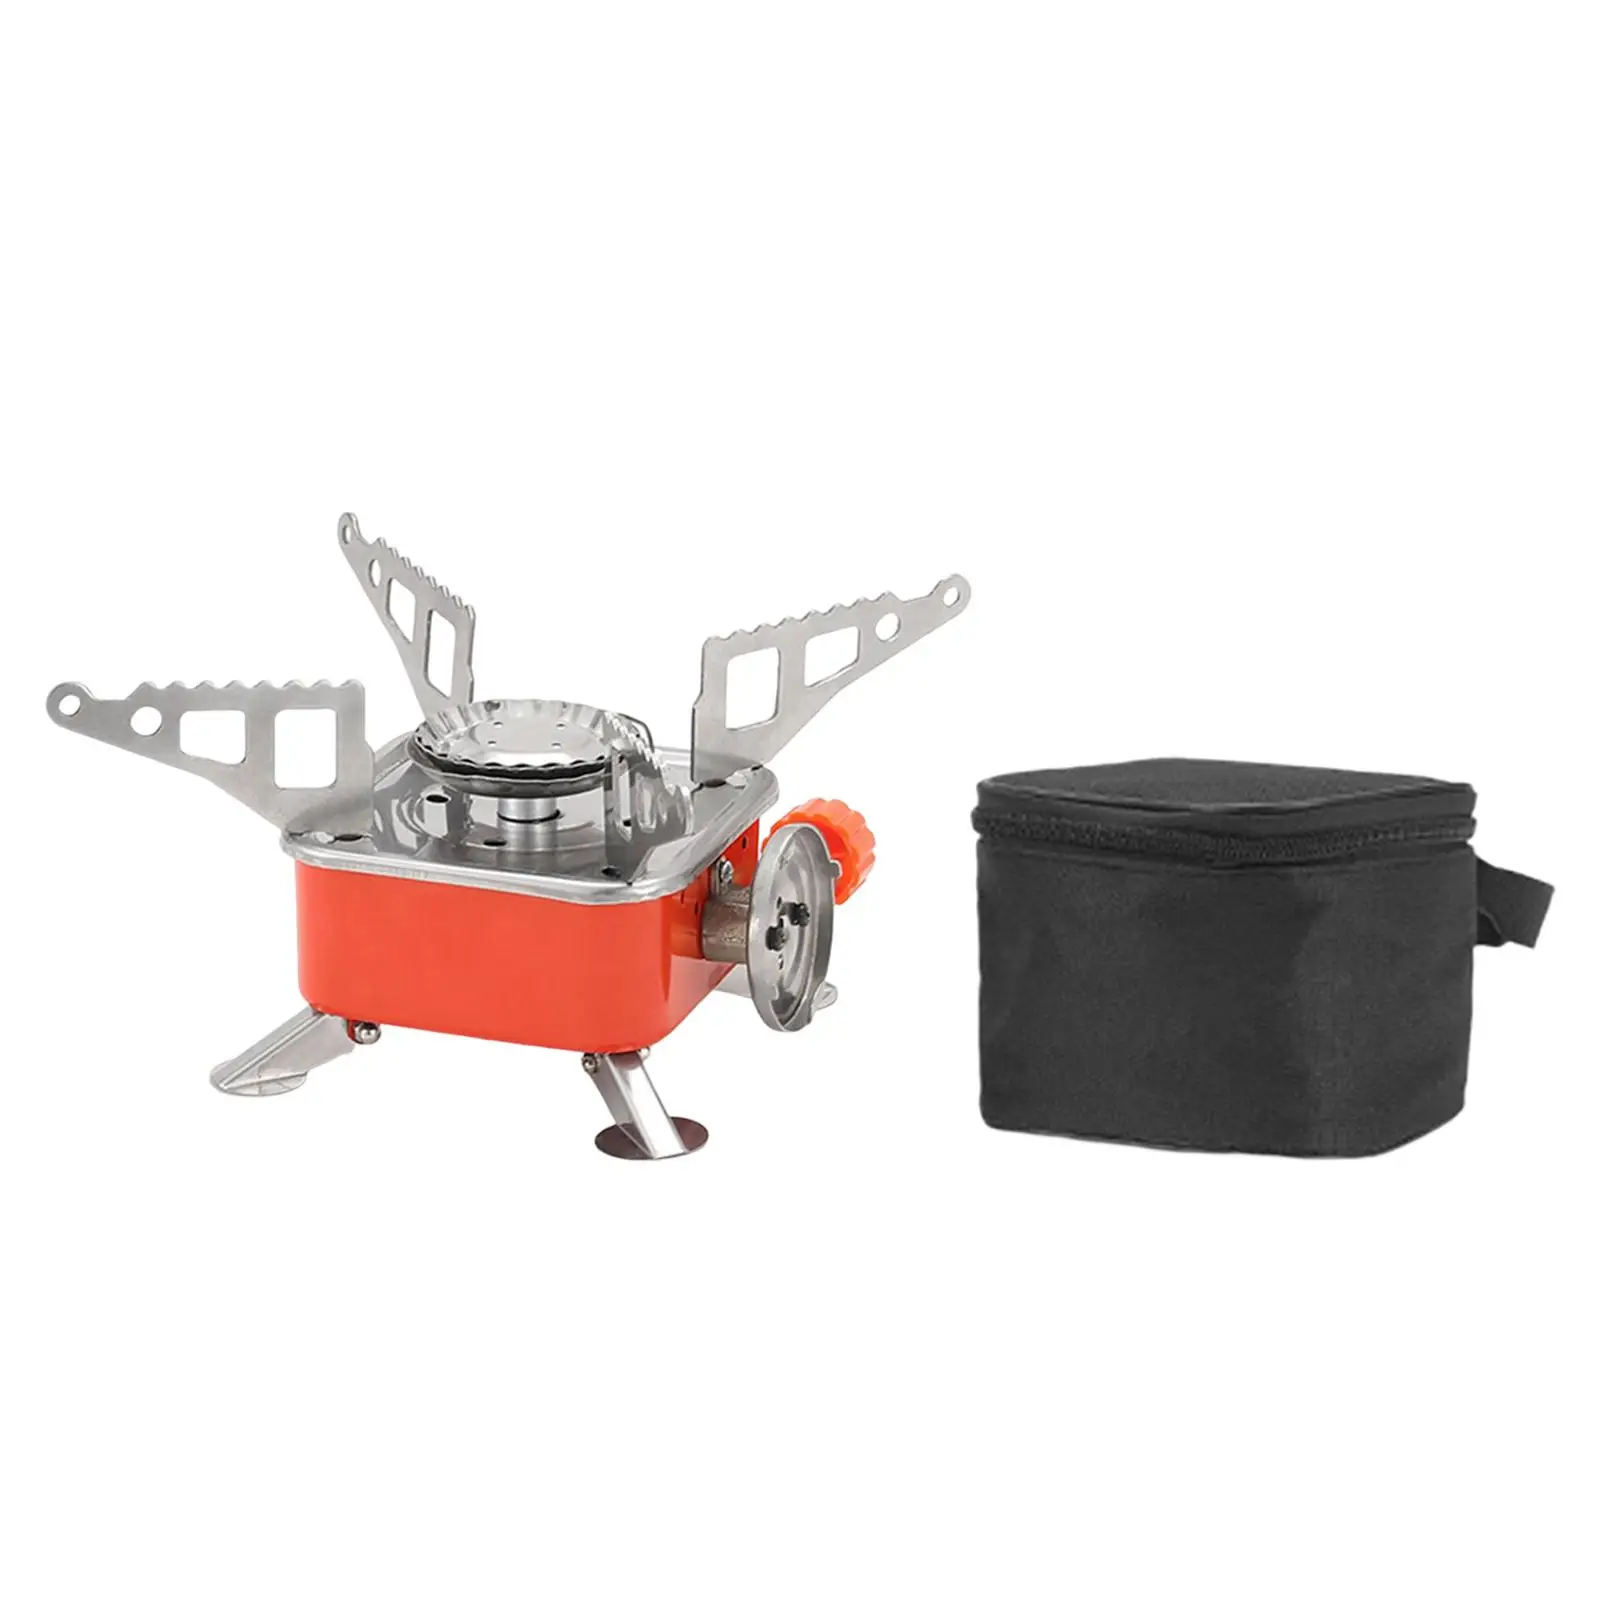 Camping Gas Stove with Storage Case Ultralight Stove Burner for Hiking